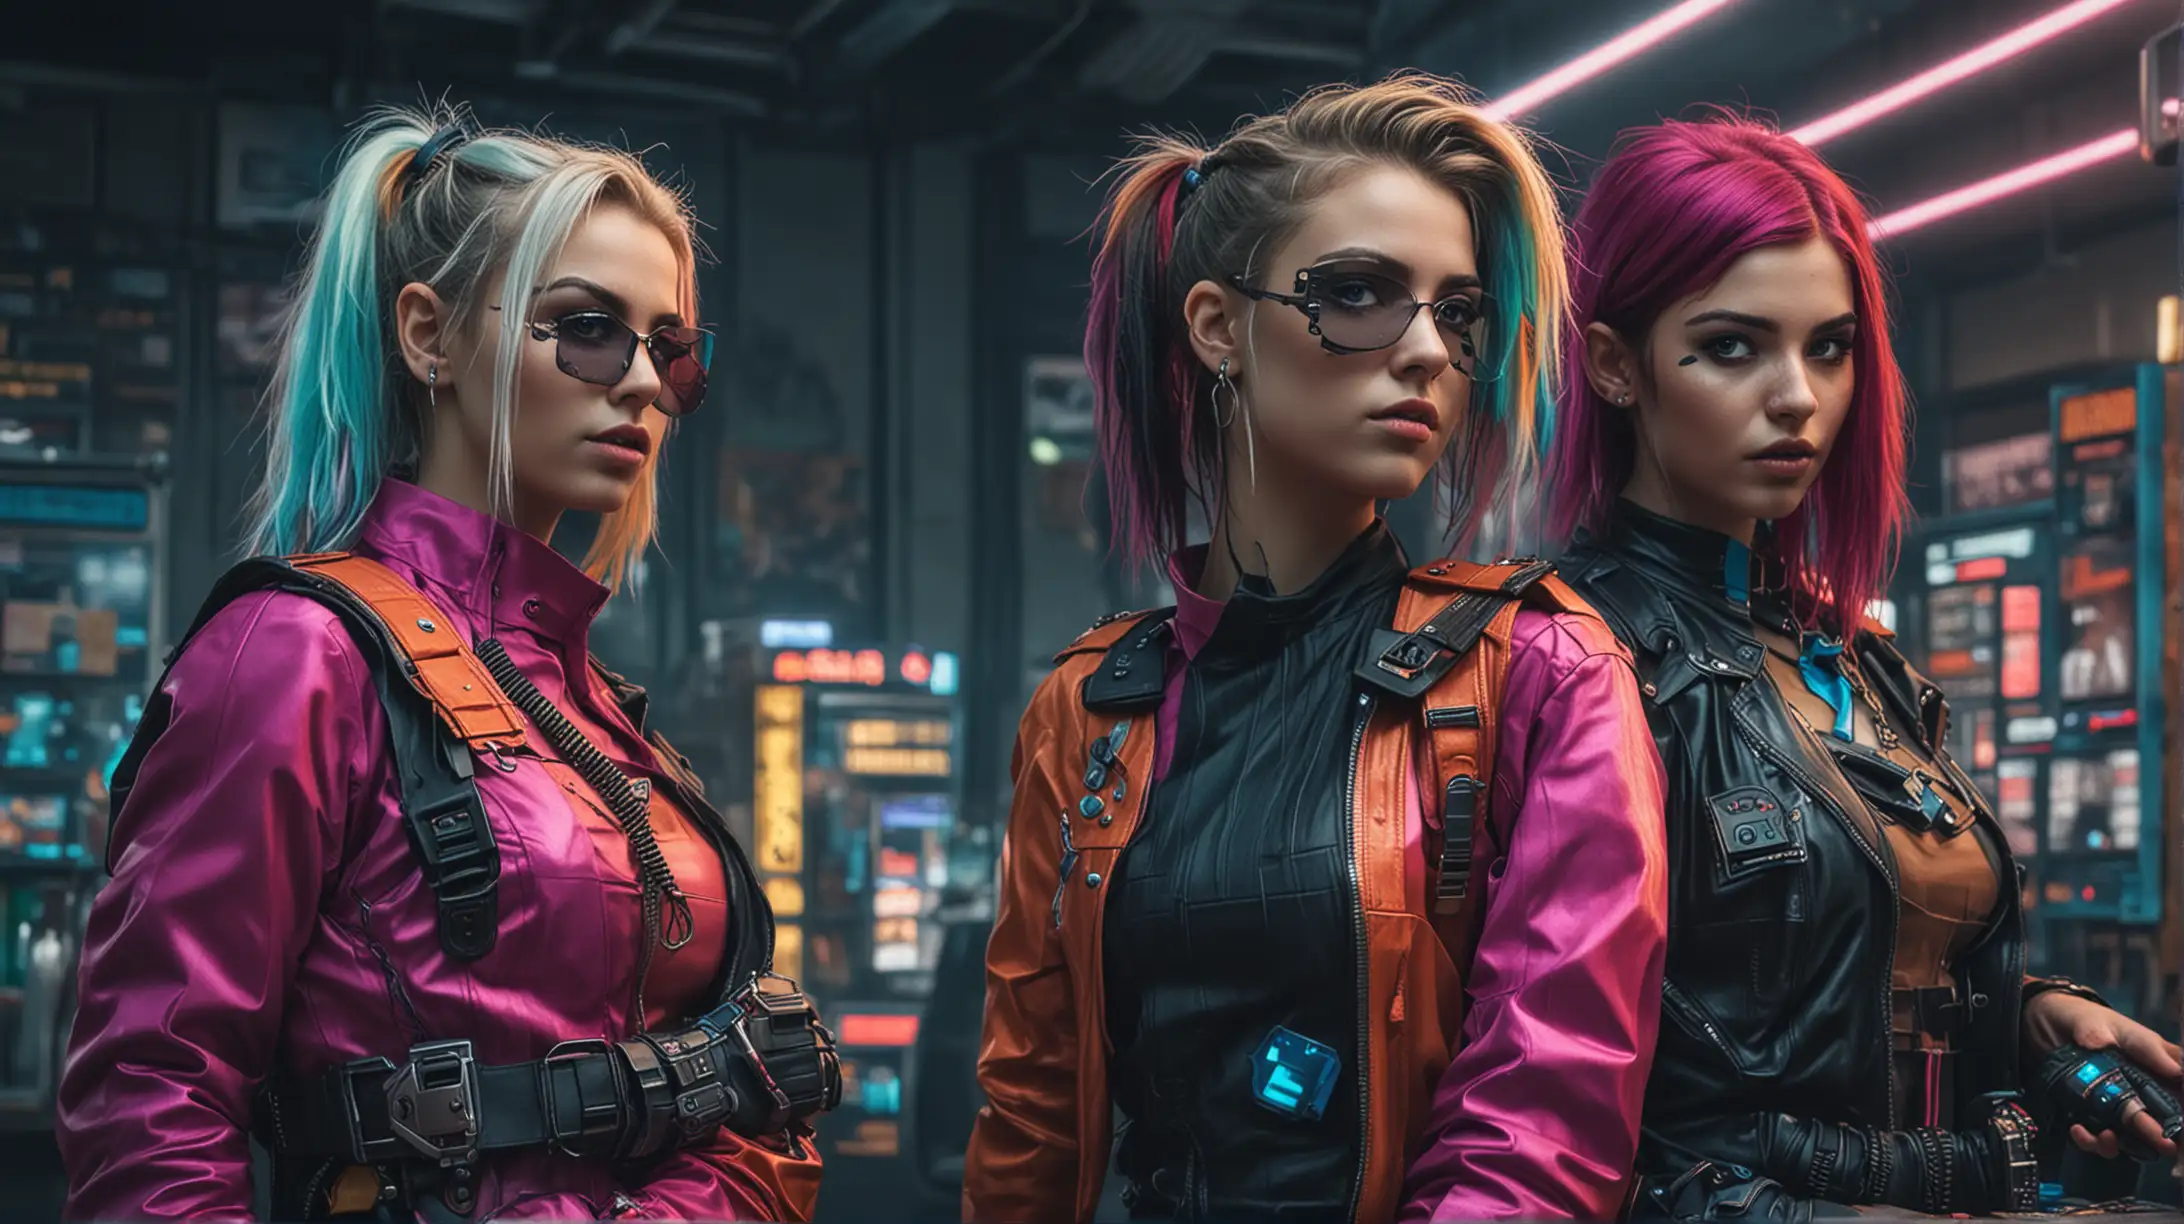 Three Young Women Robbing a Bank in Colorful Cyberpunk Uniforms